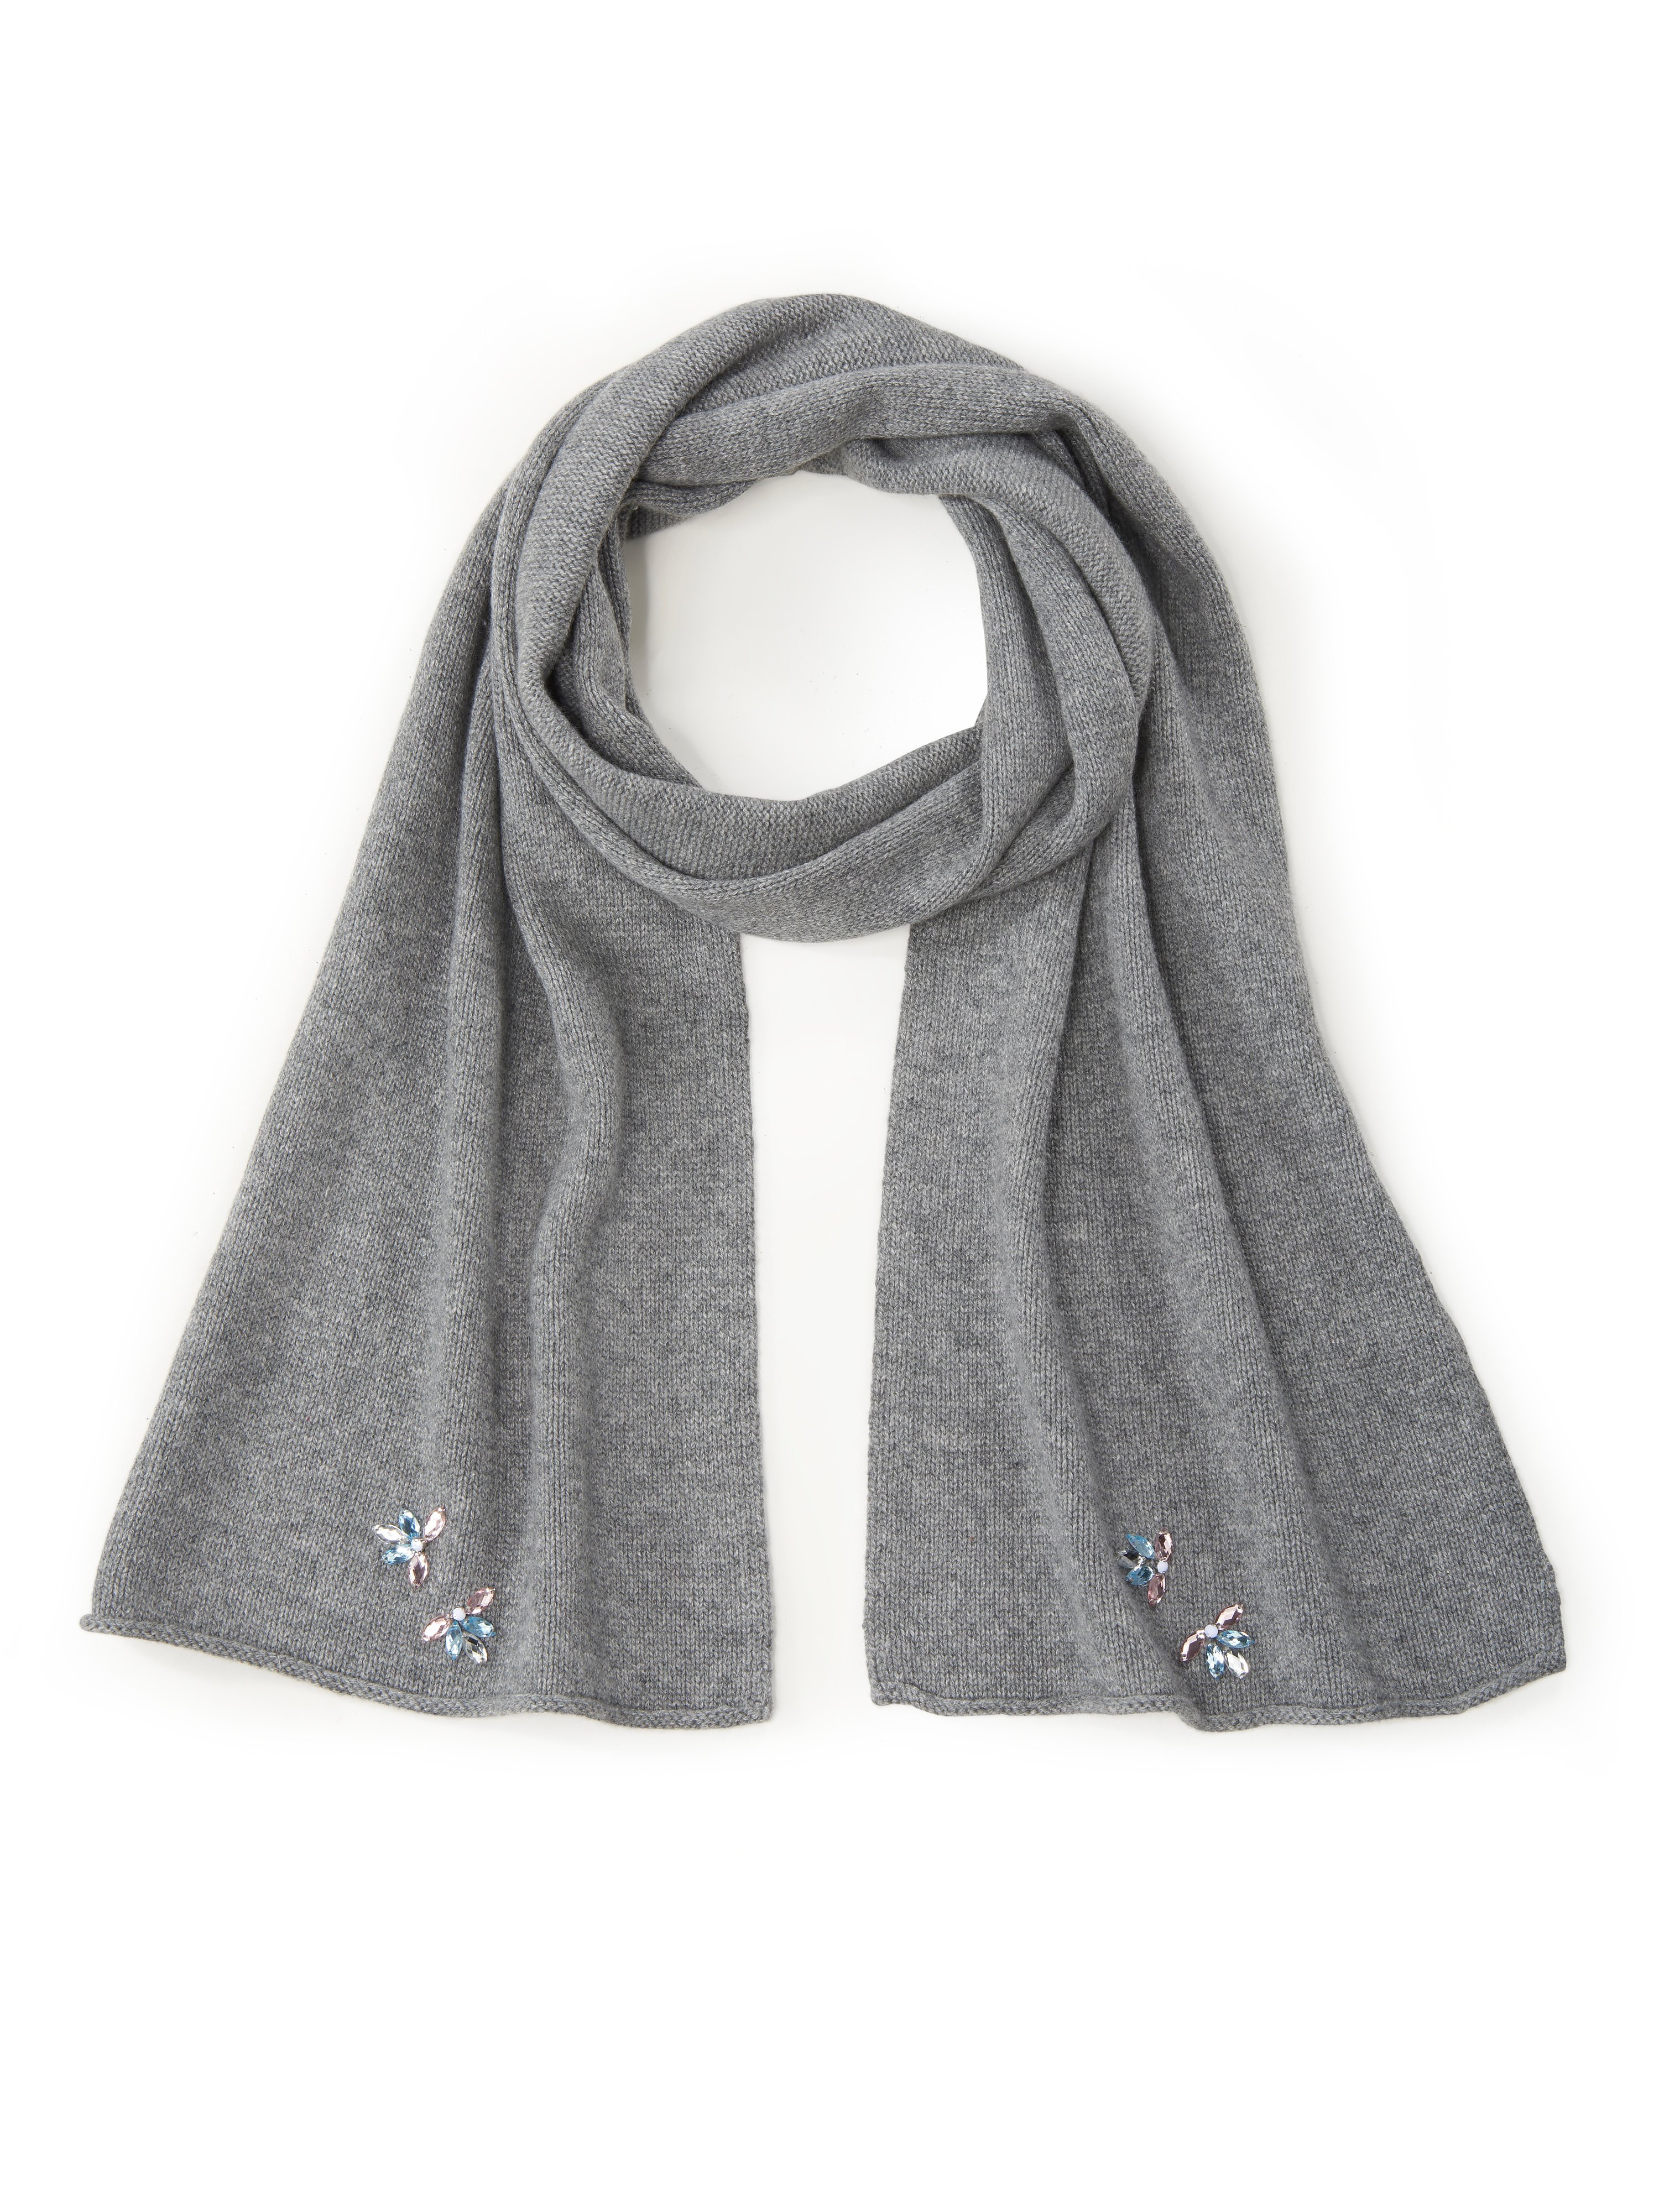 Scarf in 100% cashmere Peter Hahn Cashmere grey